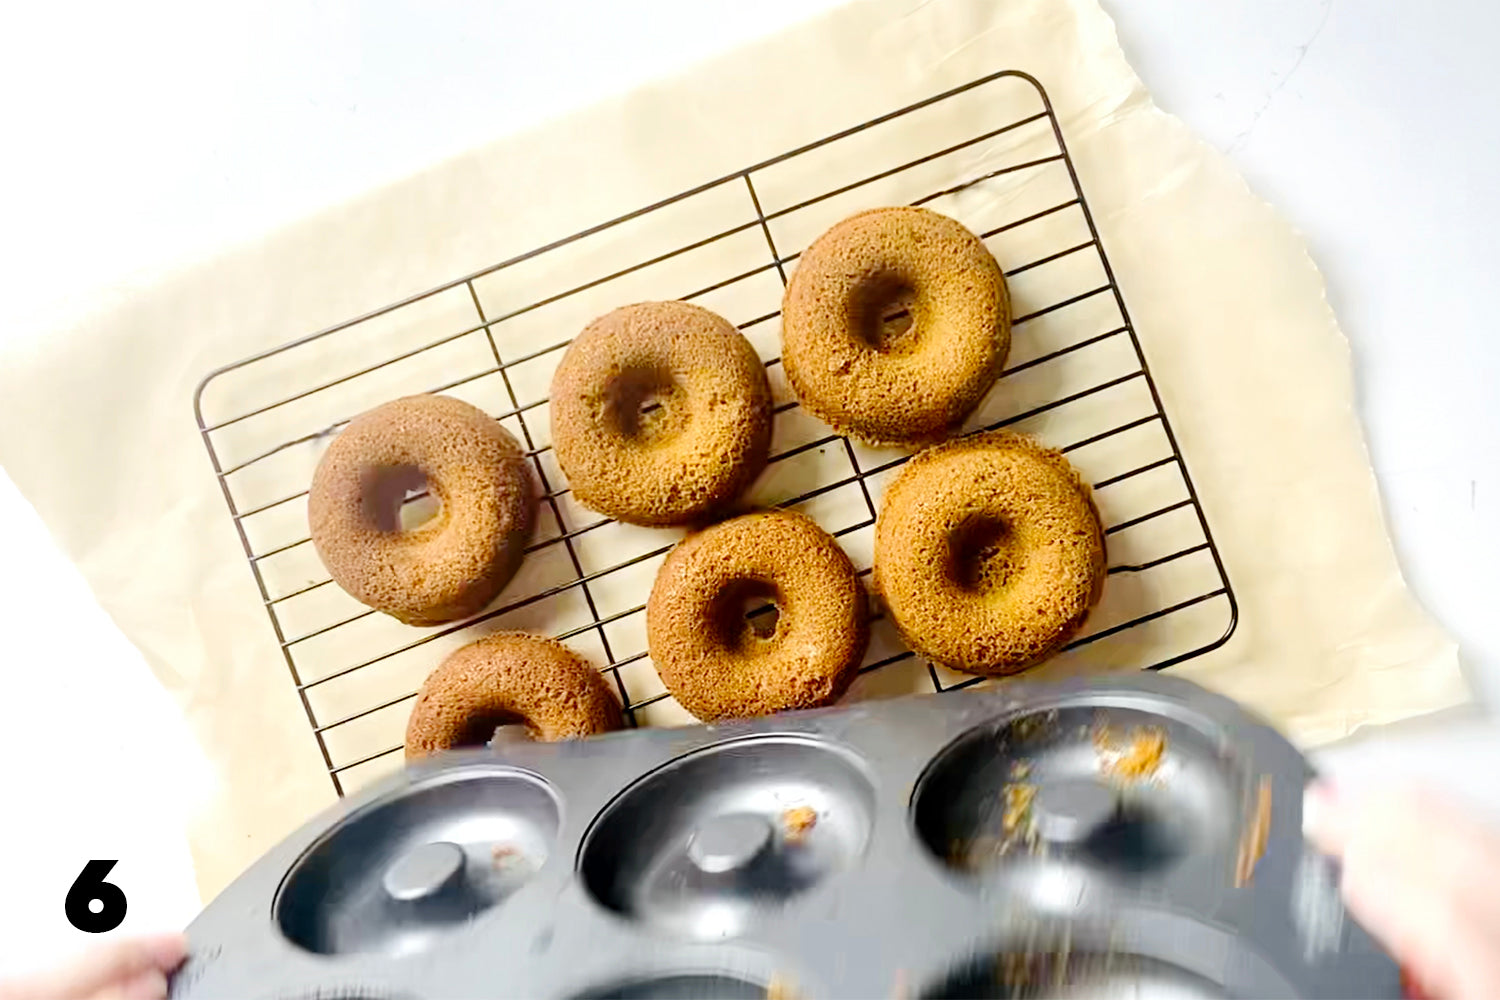 placing baked donuts on wire rack